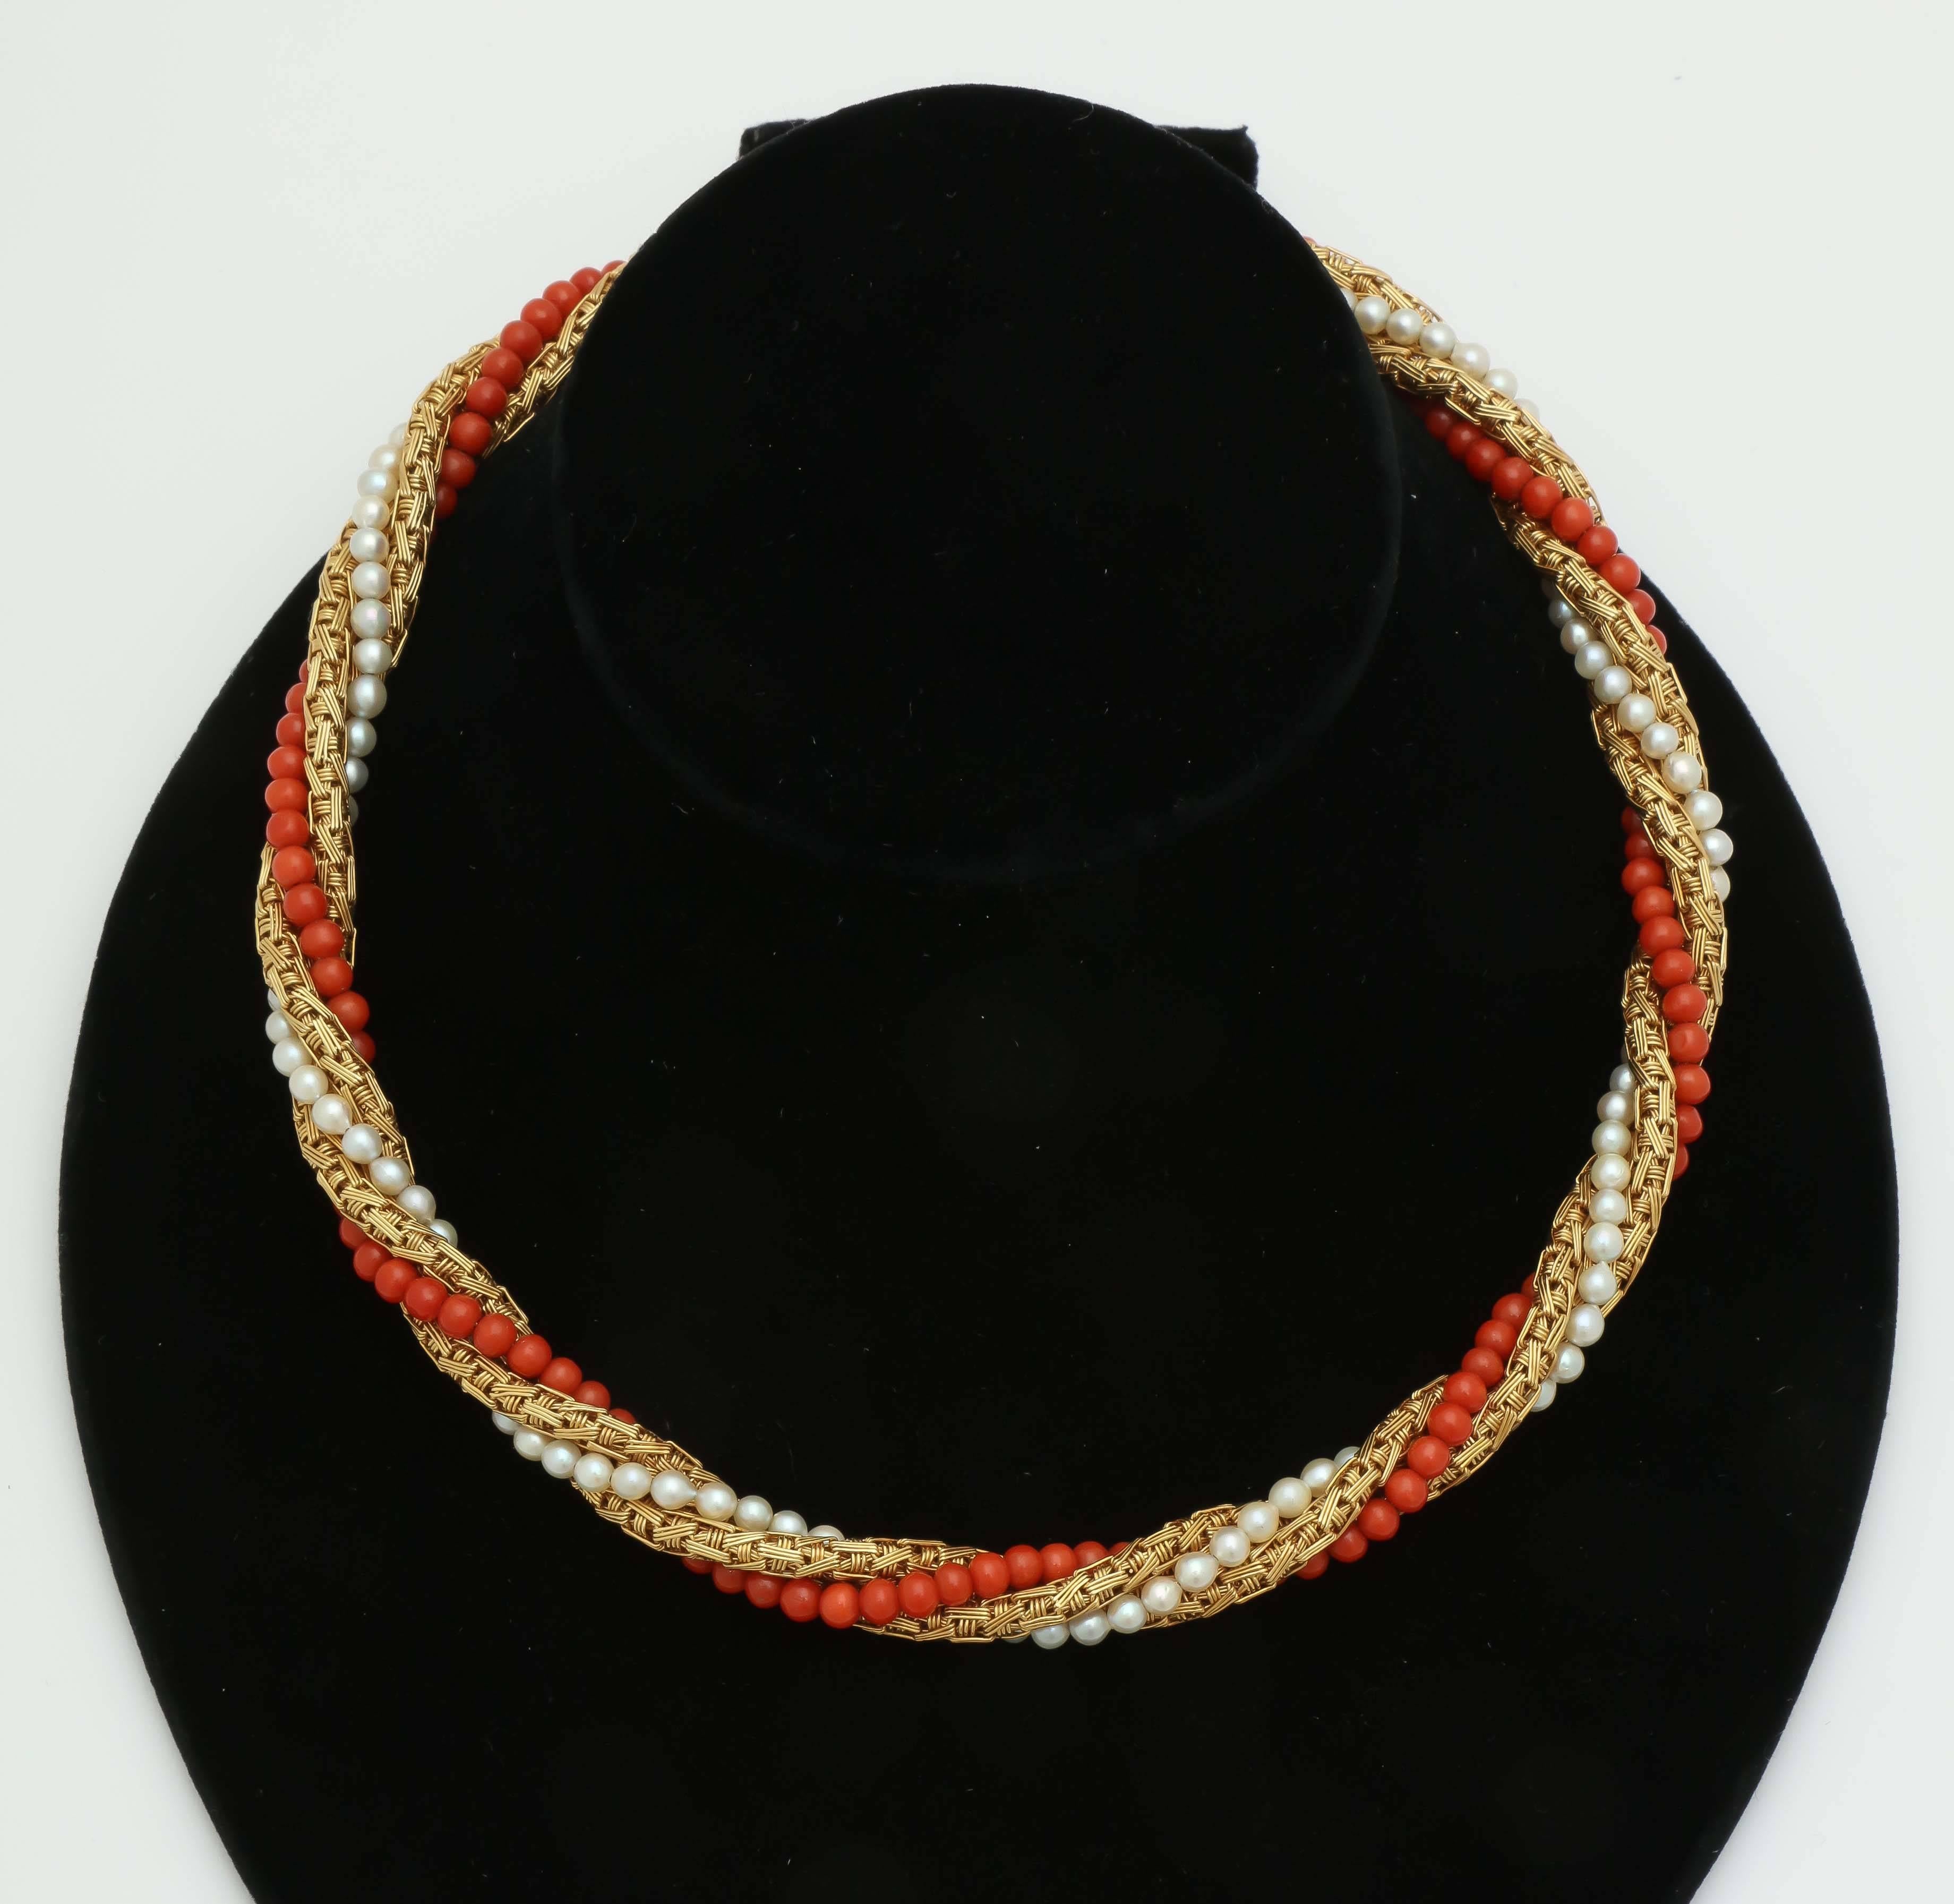 18kt Yellow Gold Chic Necklace Comprised Of Numerous Beautiful Color Coral Accents and intertwined with numerous High Quality Cultured Round Pearls . Coral and Pearl Stones Approximately 3MM Each.Exhibiting Beautiful Gold Textured Craftmanship his